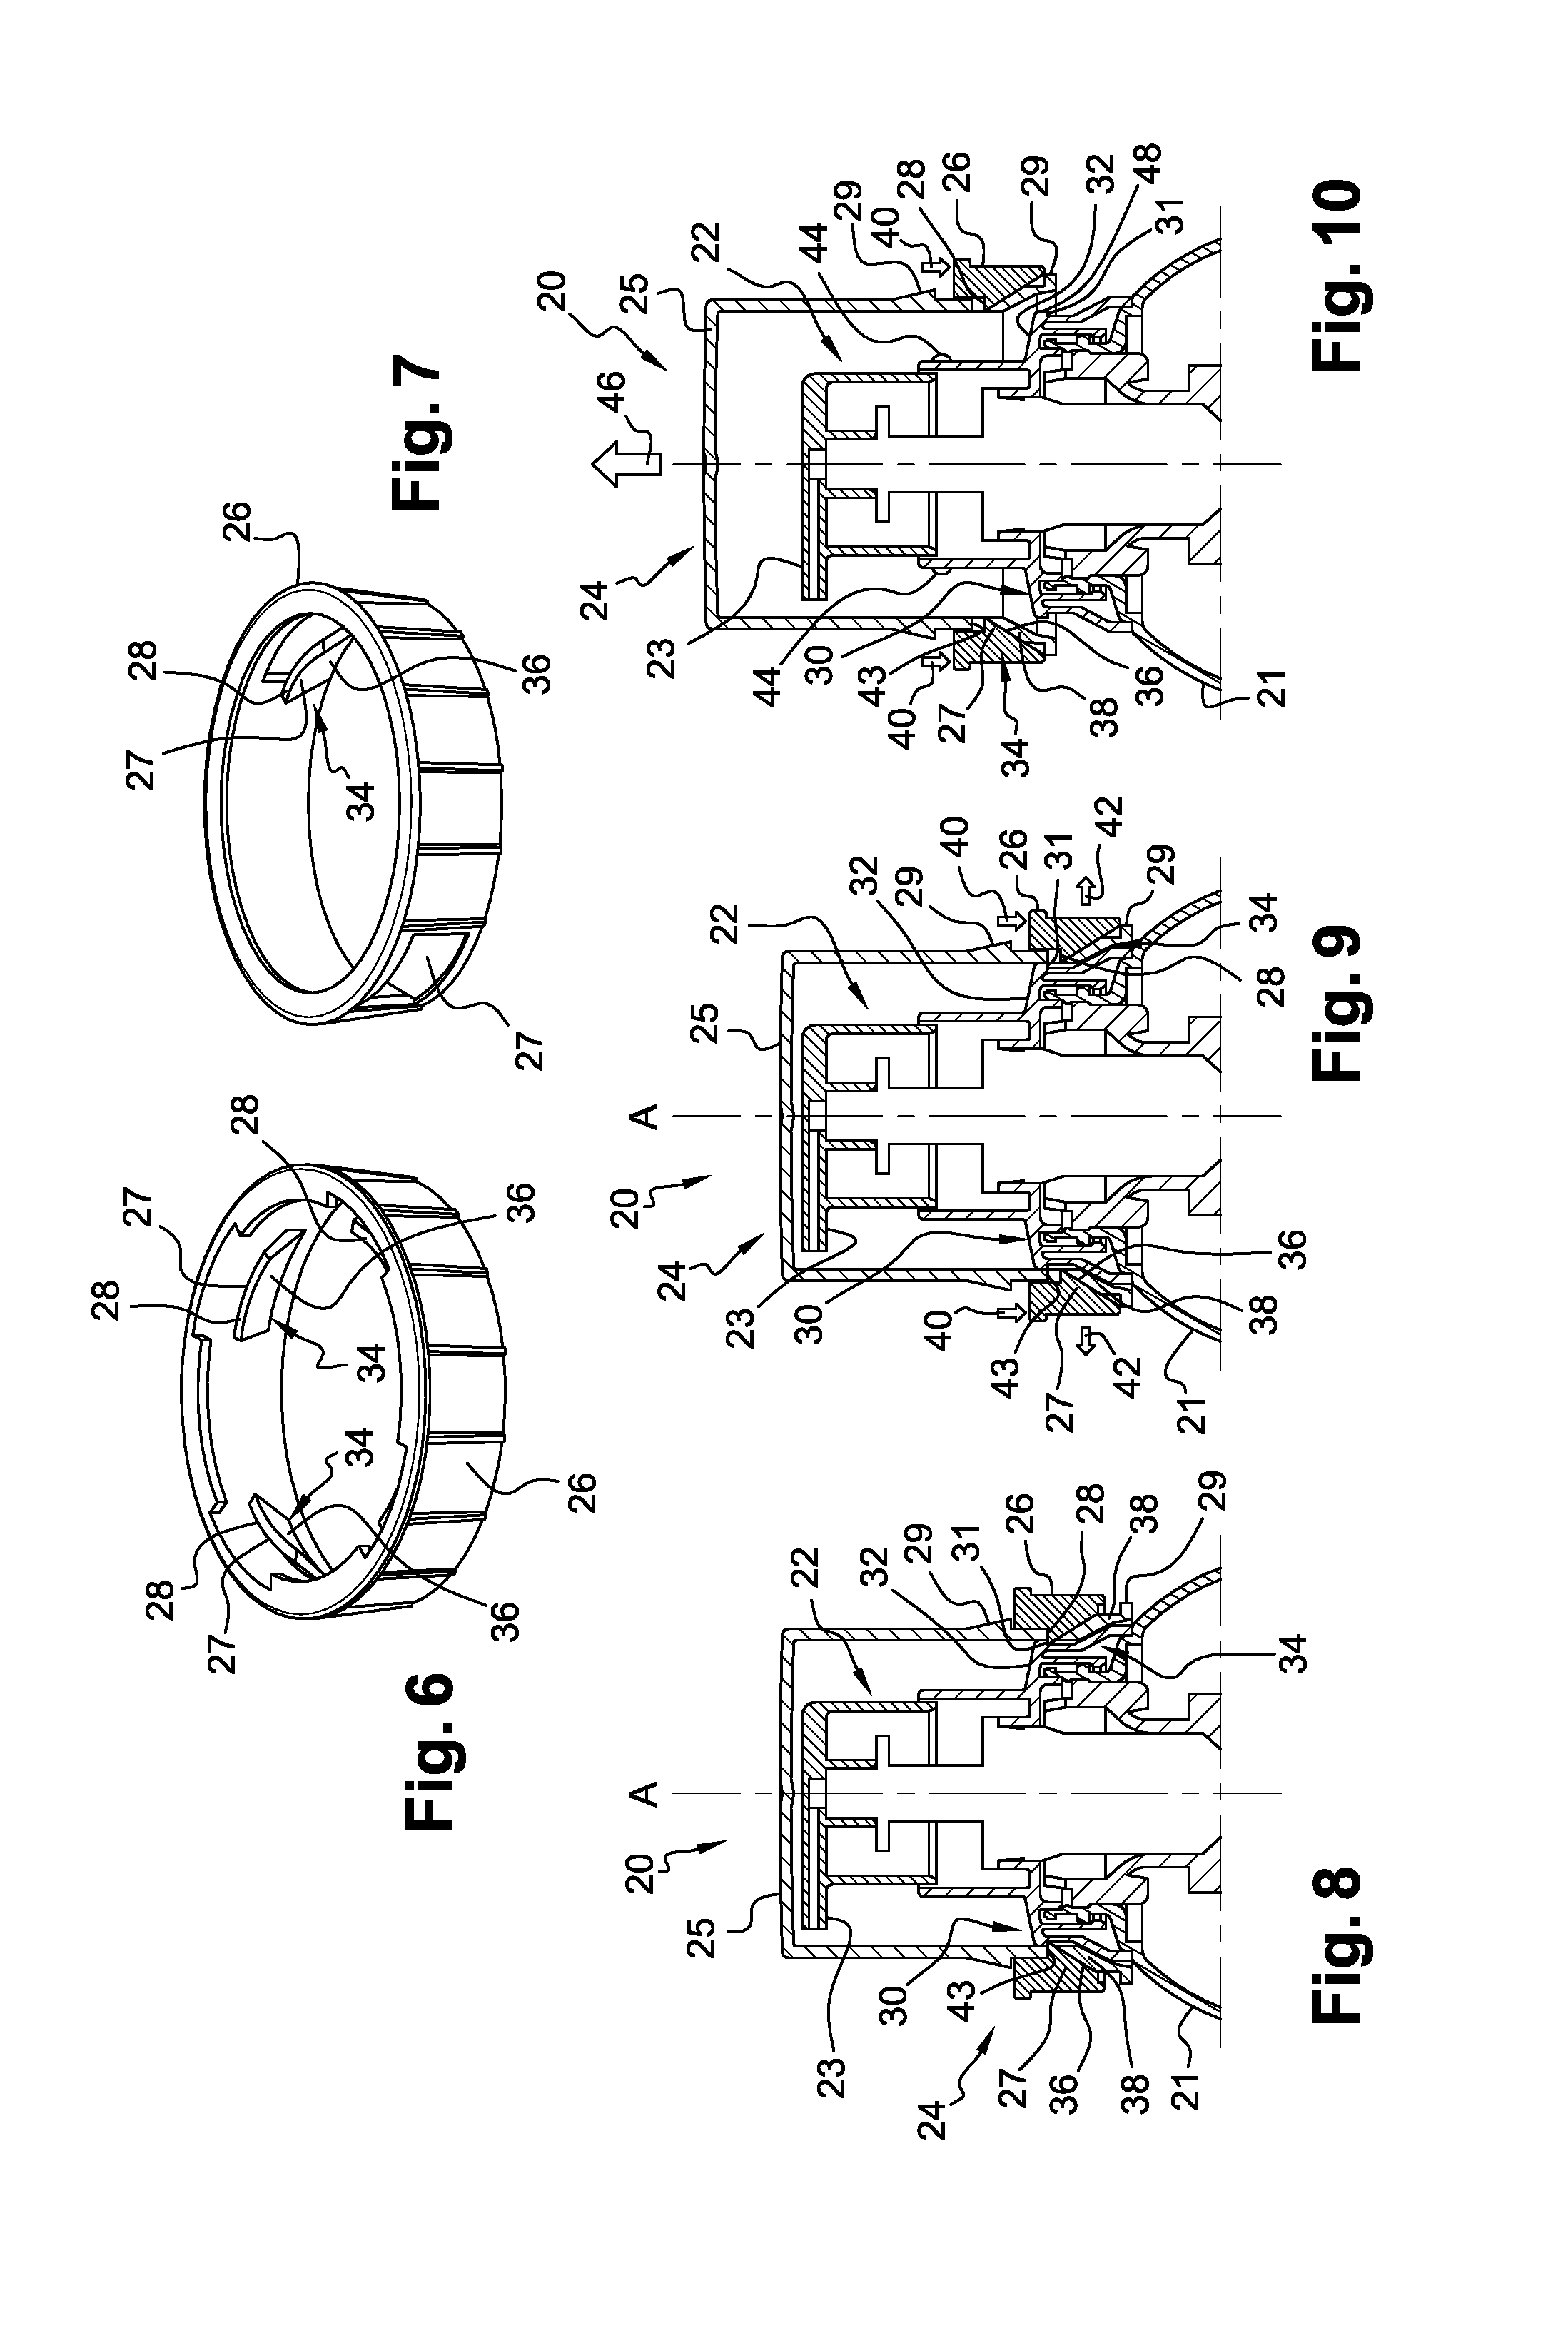 Device For Closing A Container Including Improved Secure Closure Means